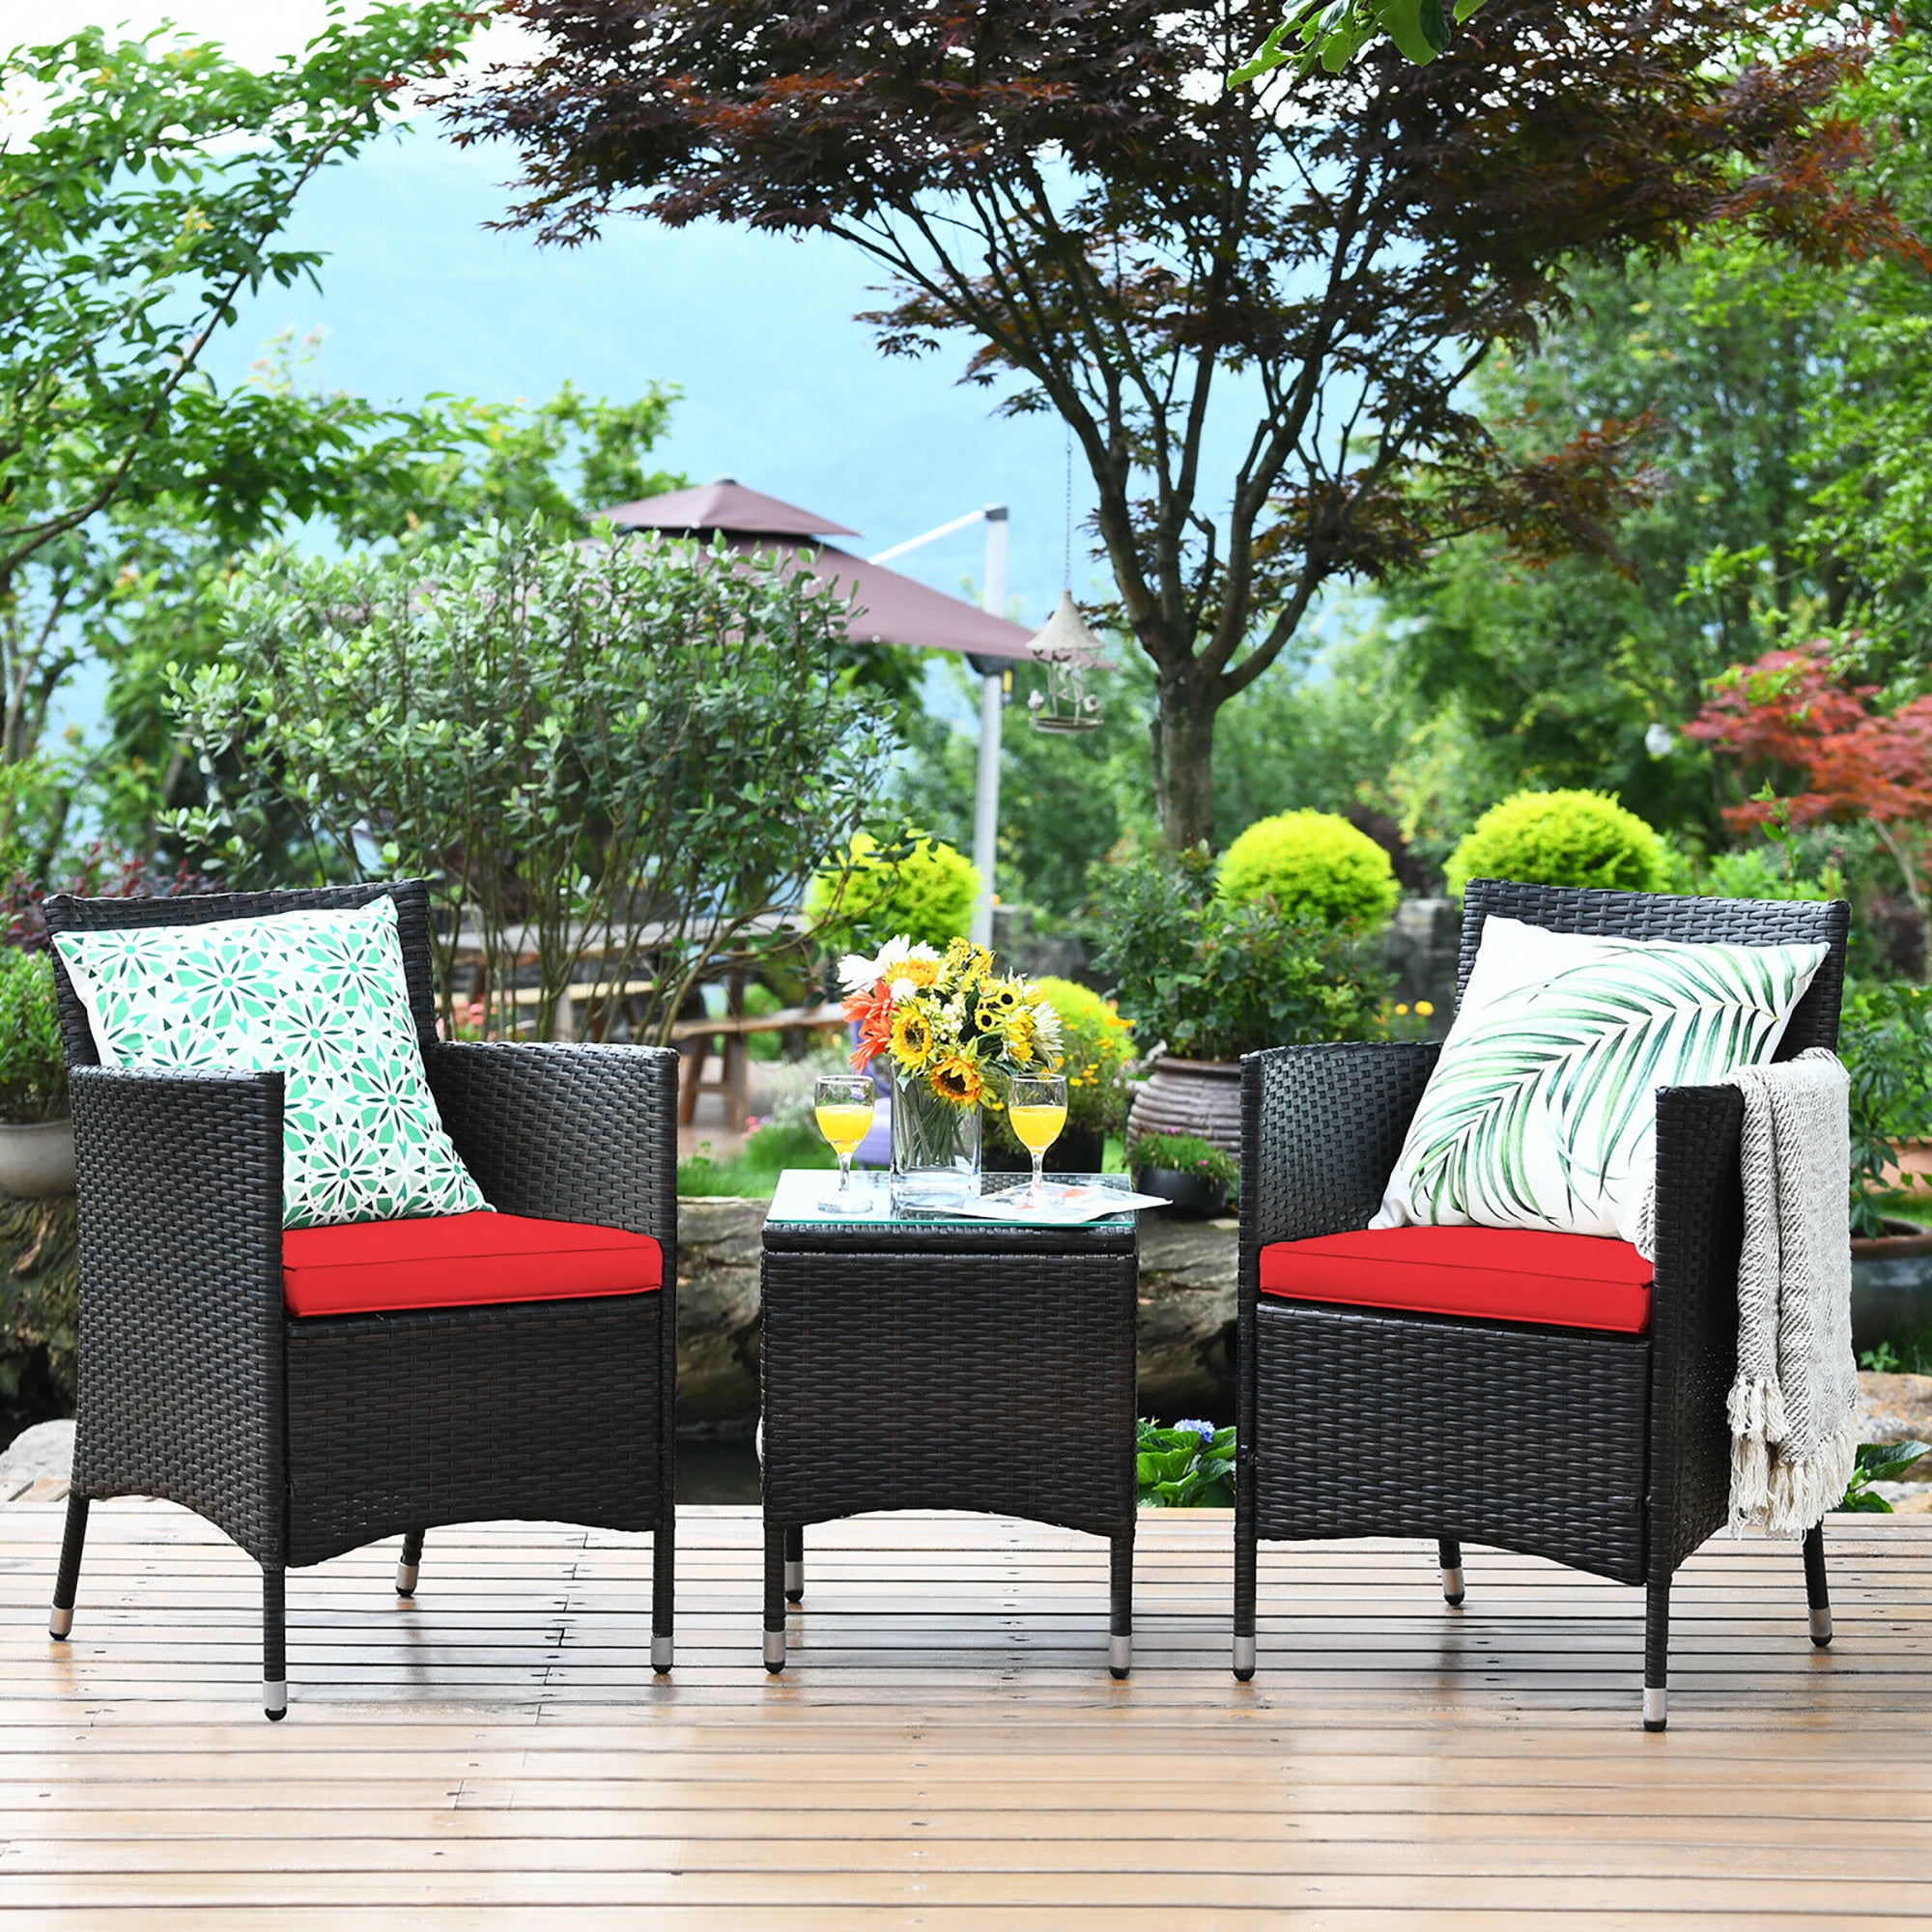 Costway 3pcs Patio Wicker Furniture Set Storage Table W/Protect Cover - Red